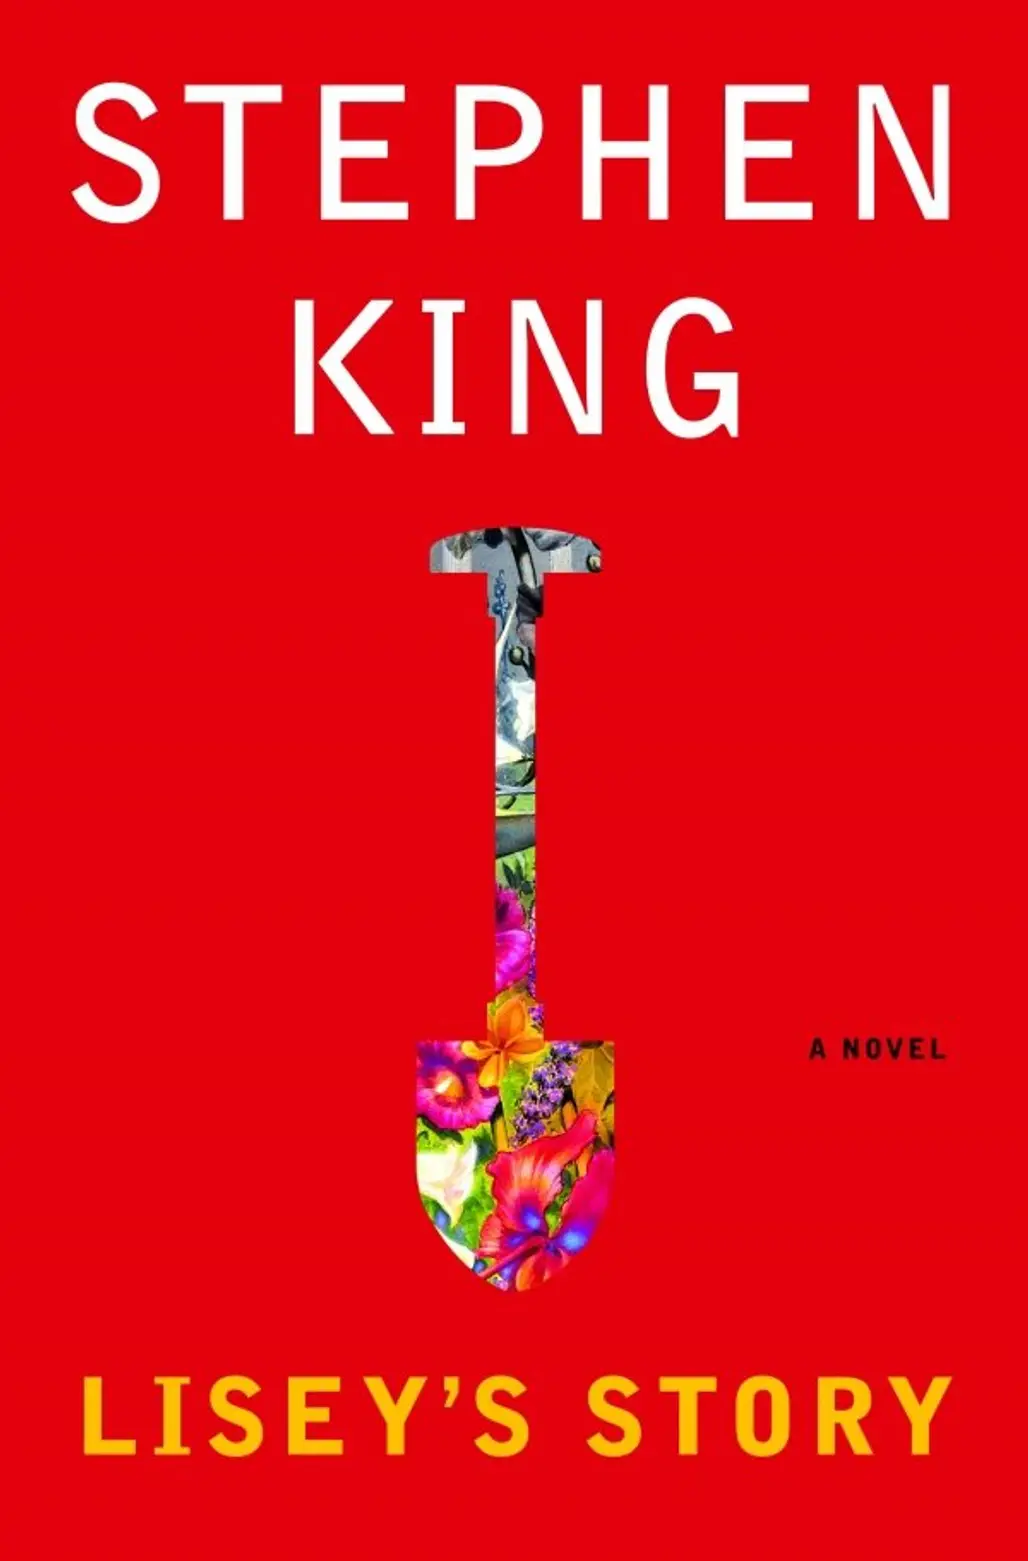 Lisey’s Story by Stephen King